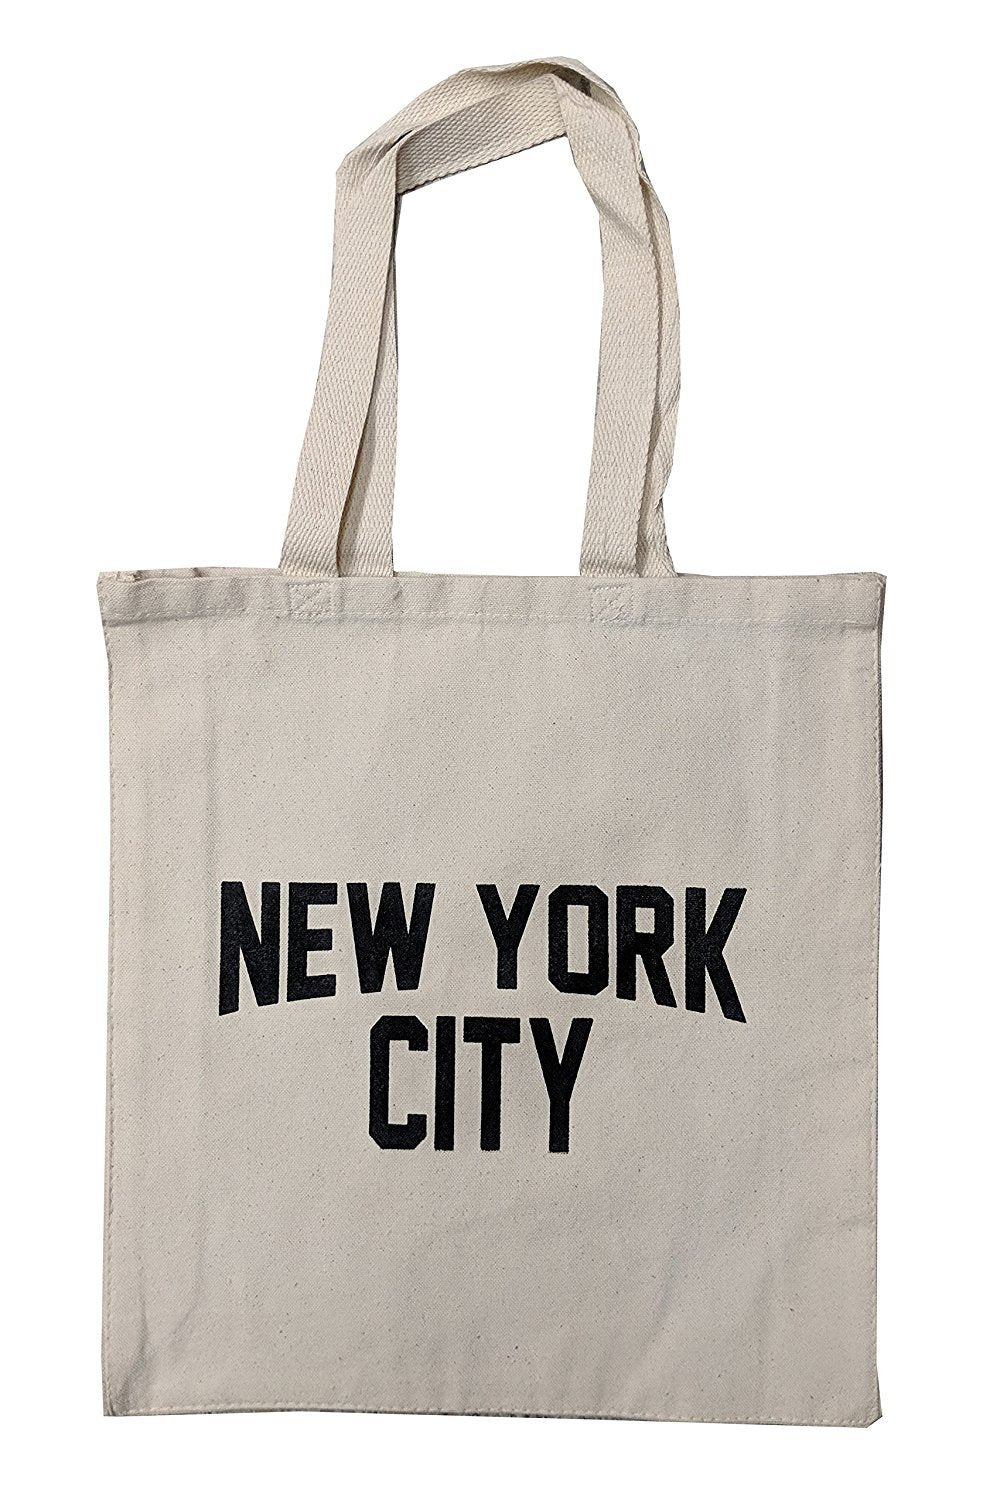 Natural New York City Gusset Tote Bag NYC Style Shopping Gym Beach Event (Natural)